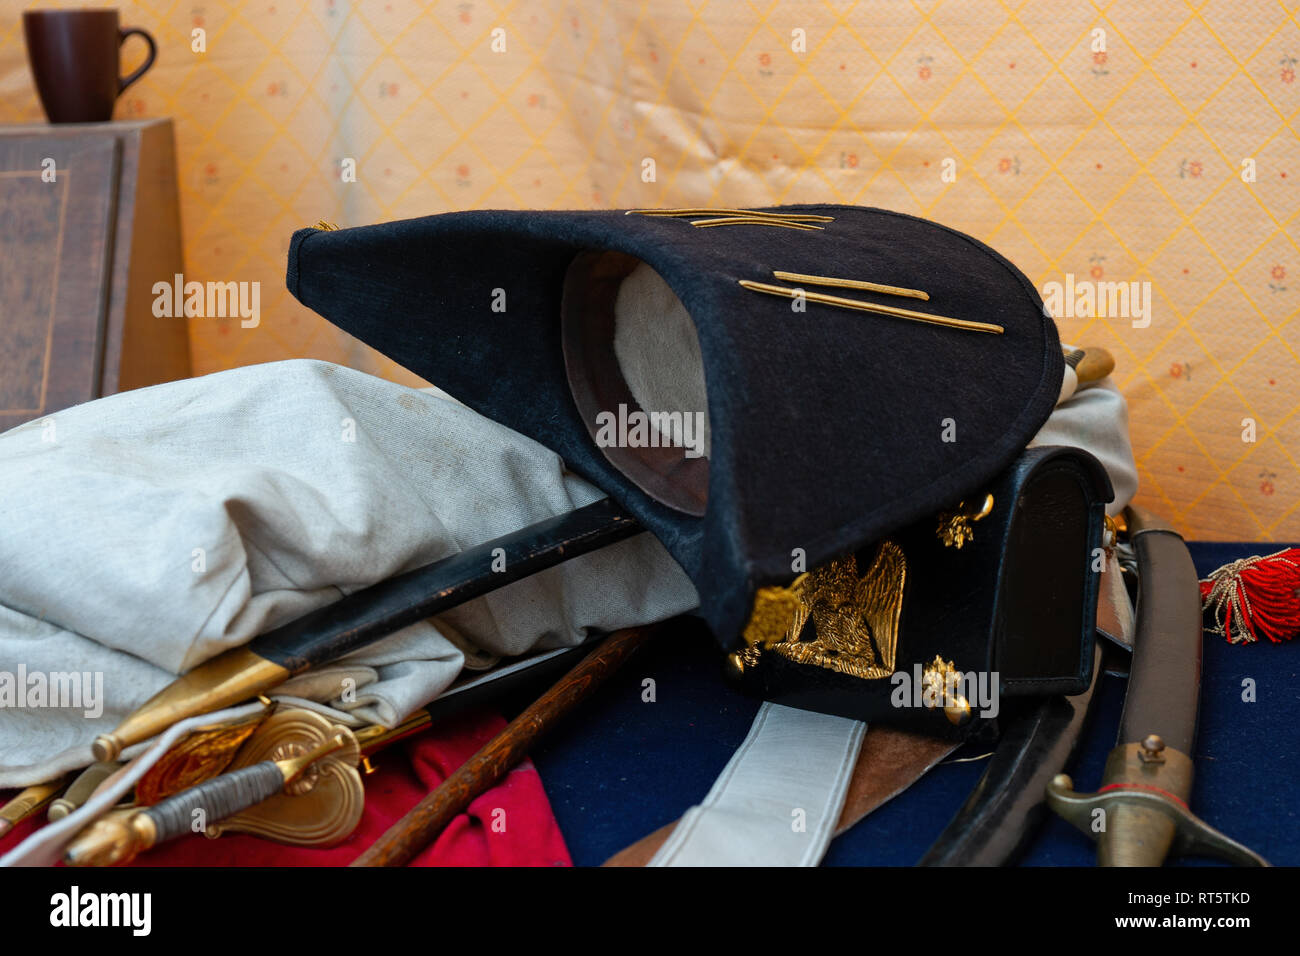 Vintage cocked hat, cartridges pouch, a pile of swords, blades and scabbards on a table. Military items of Napoleon-era wars Stock Photo